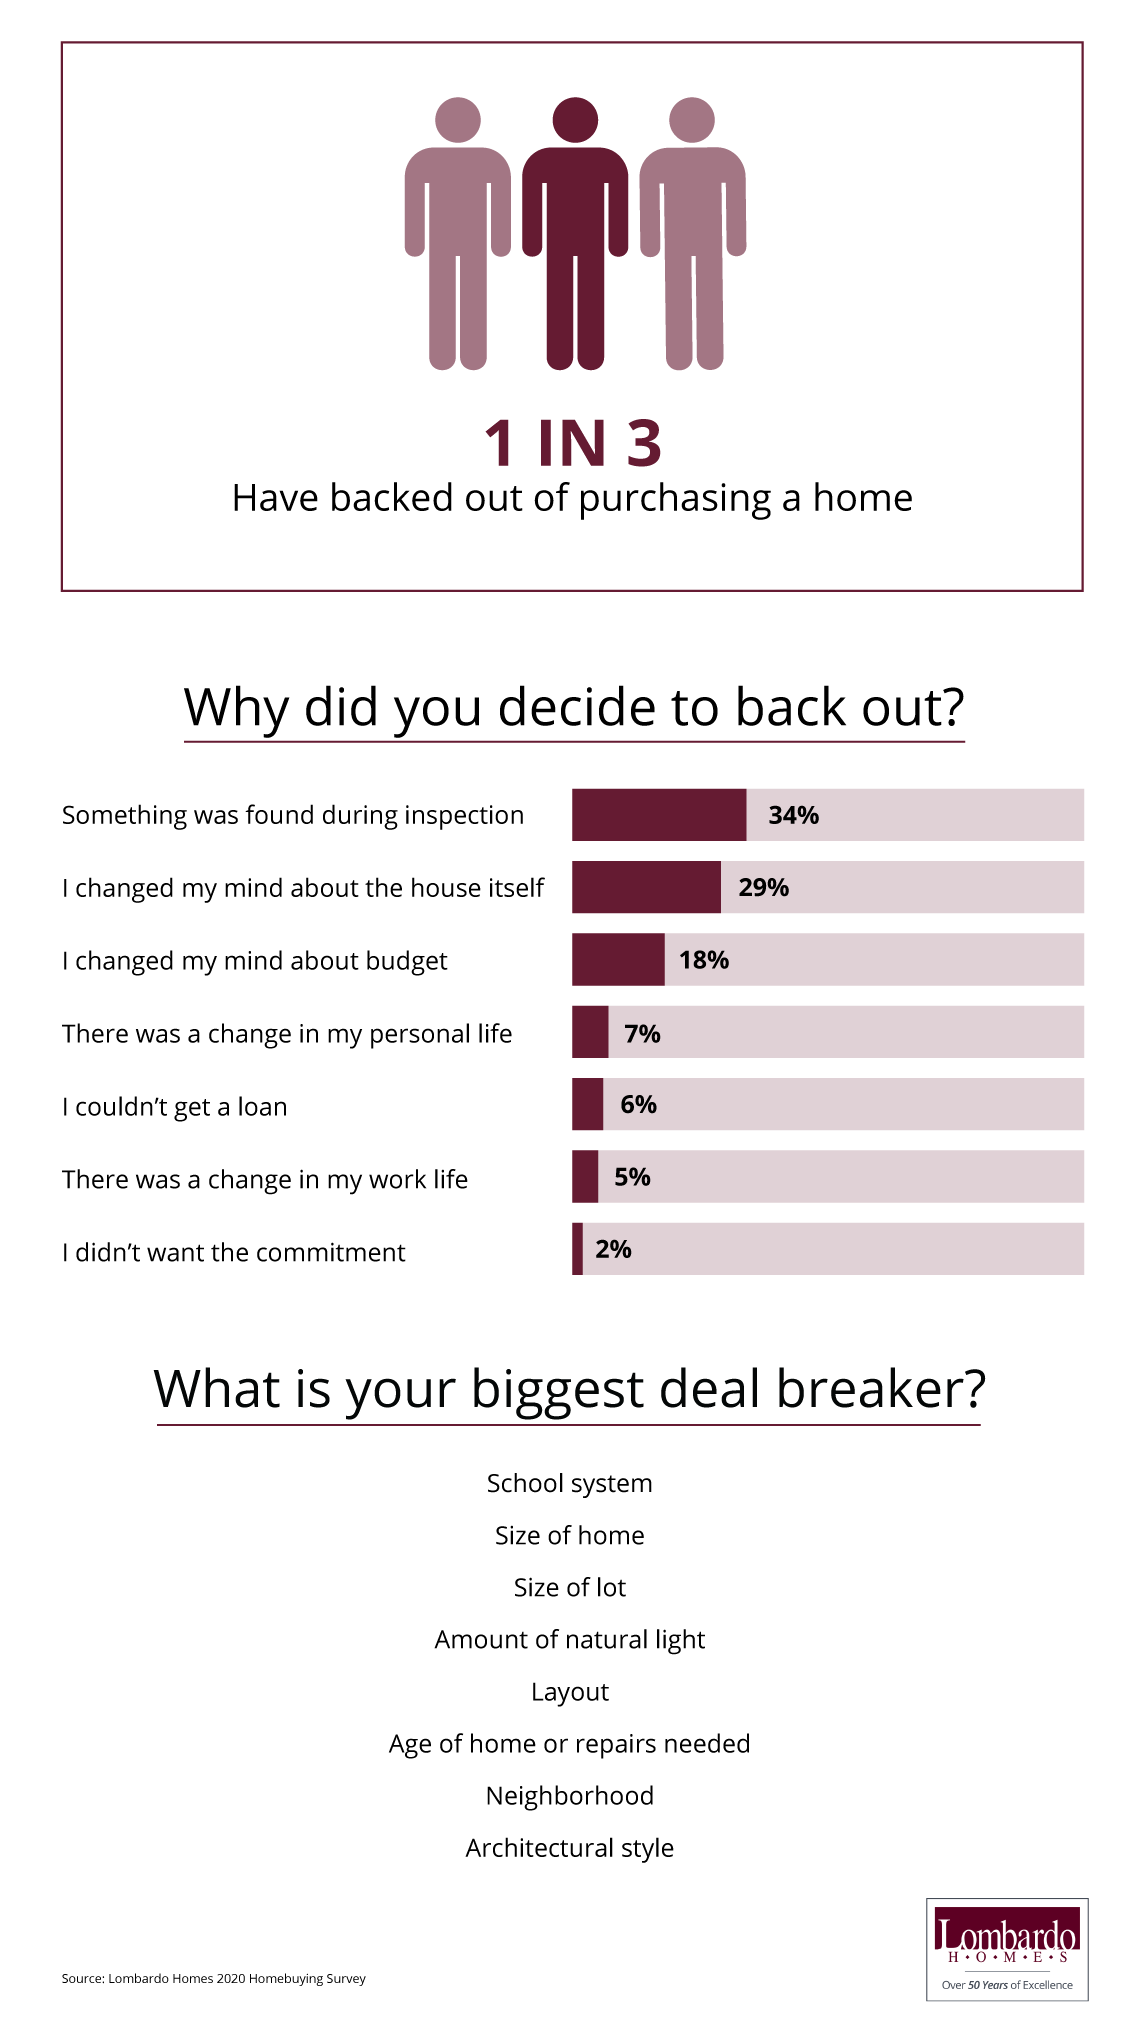 Backing Out of Purchasing a Home